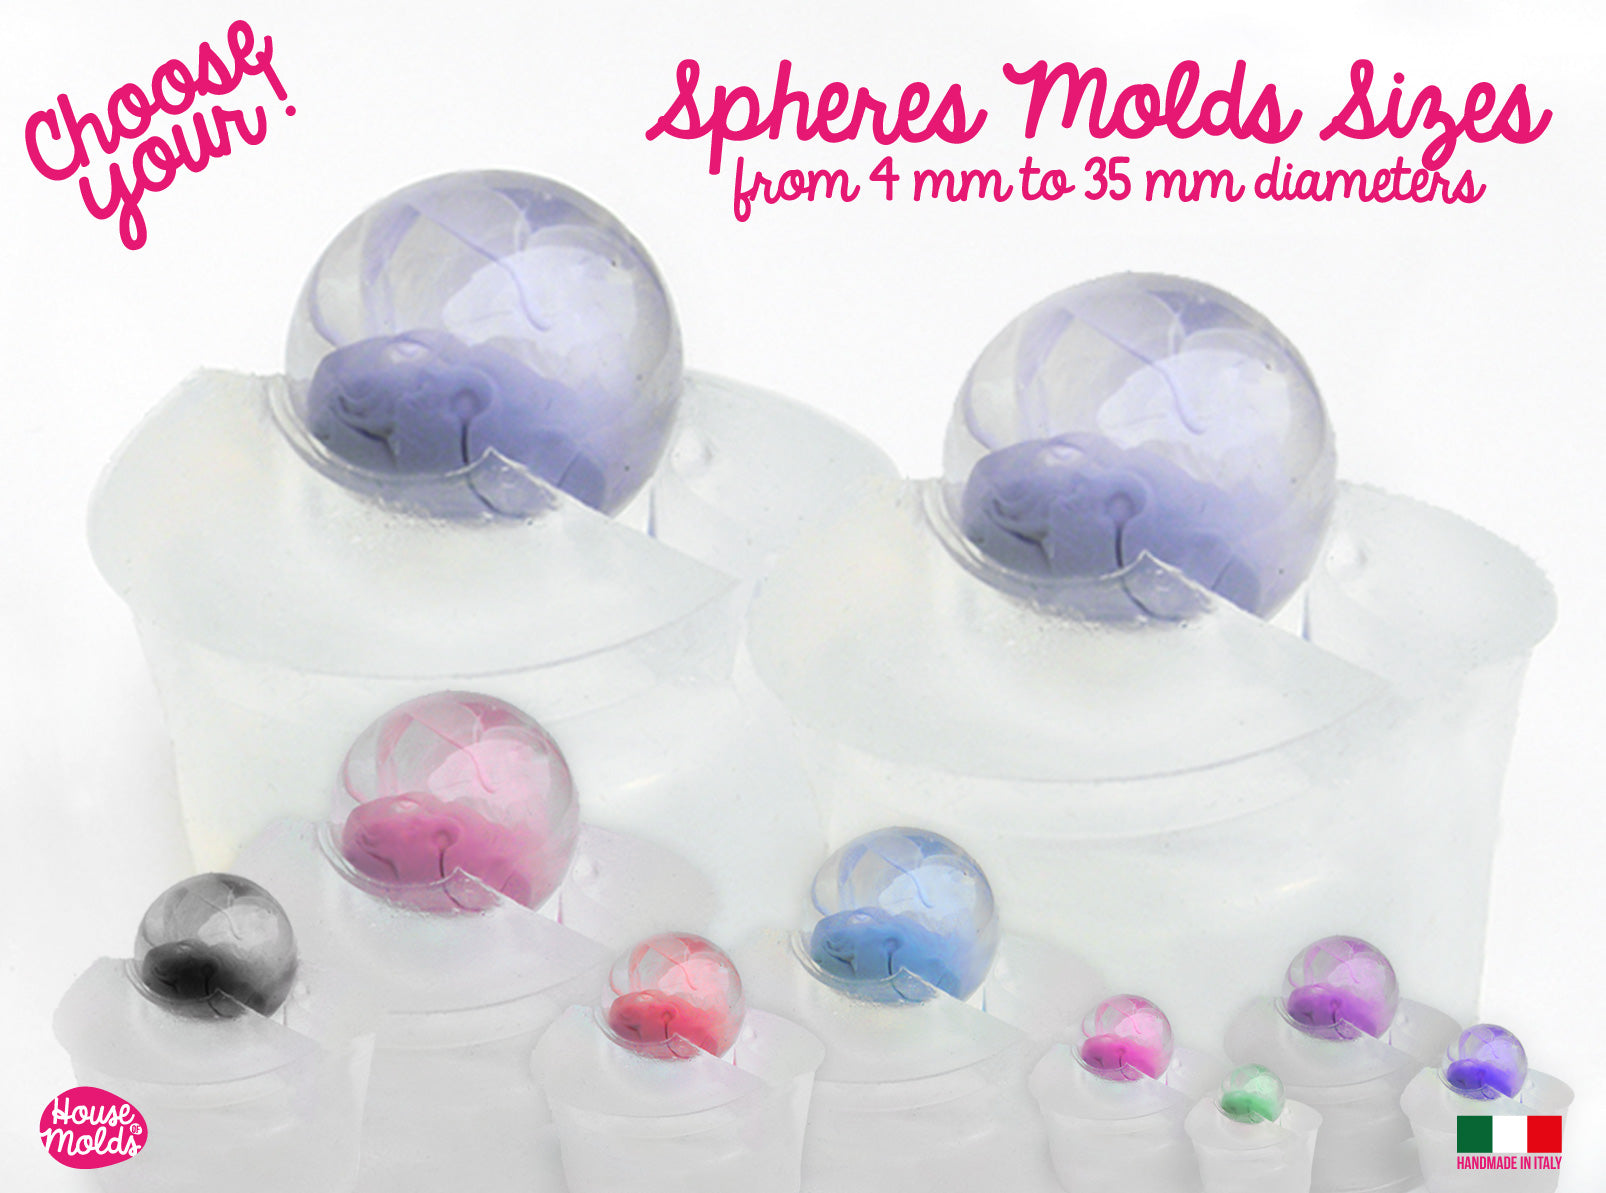 CHOOSE YOUR SPHERES MOLDS SIZE from 4 mm to 34 mm diameters